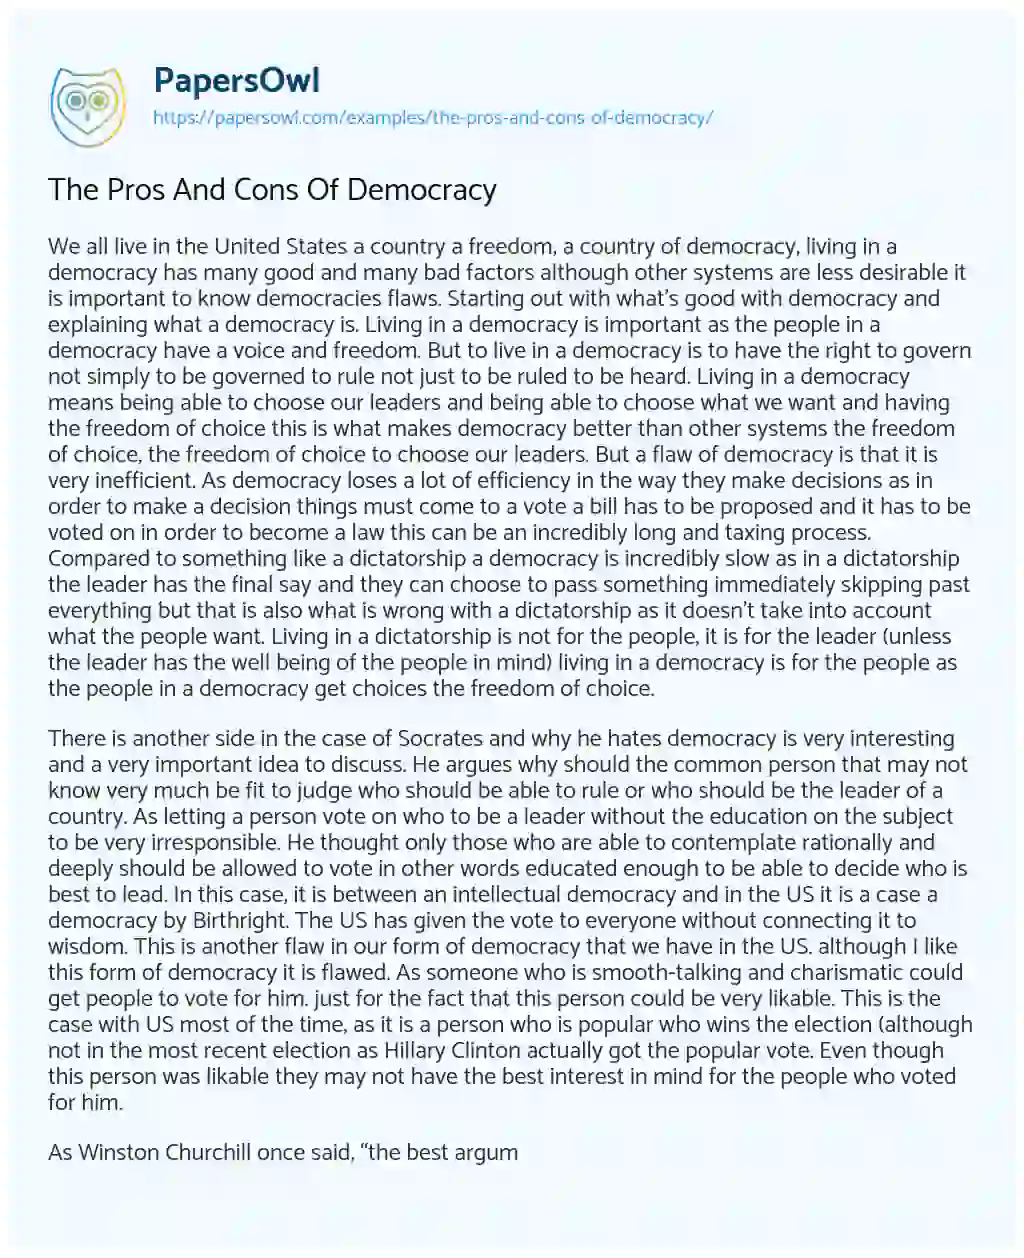 The Pros and Cons of Democracy essay